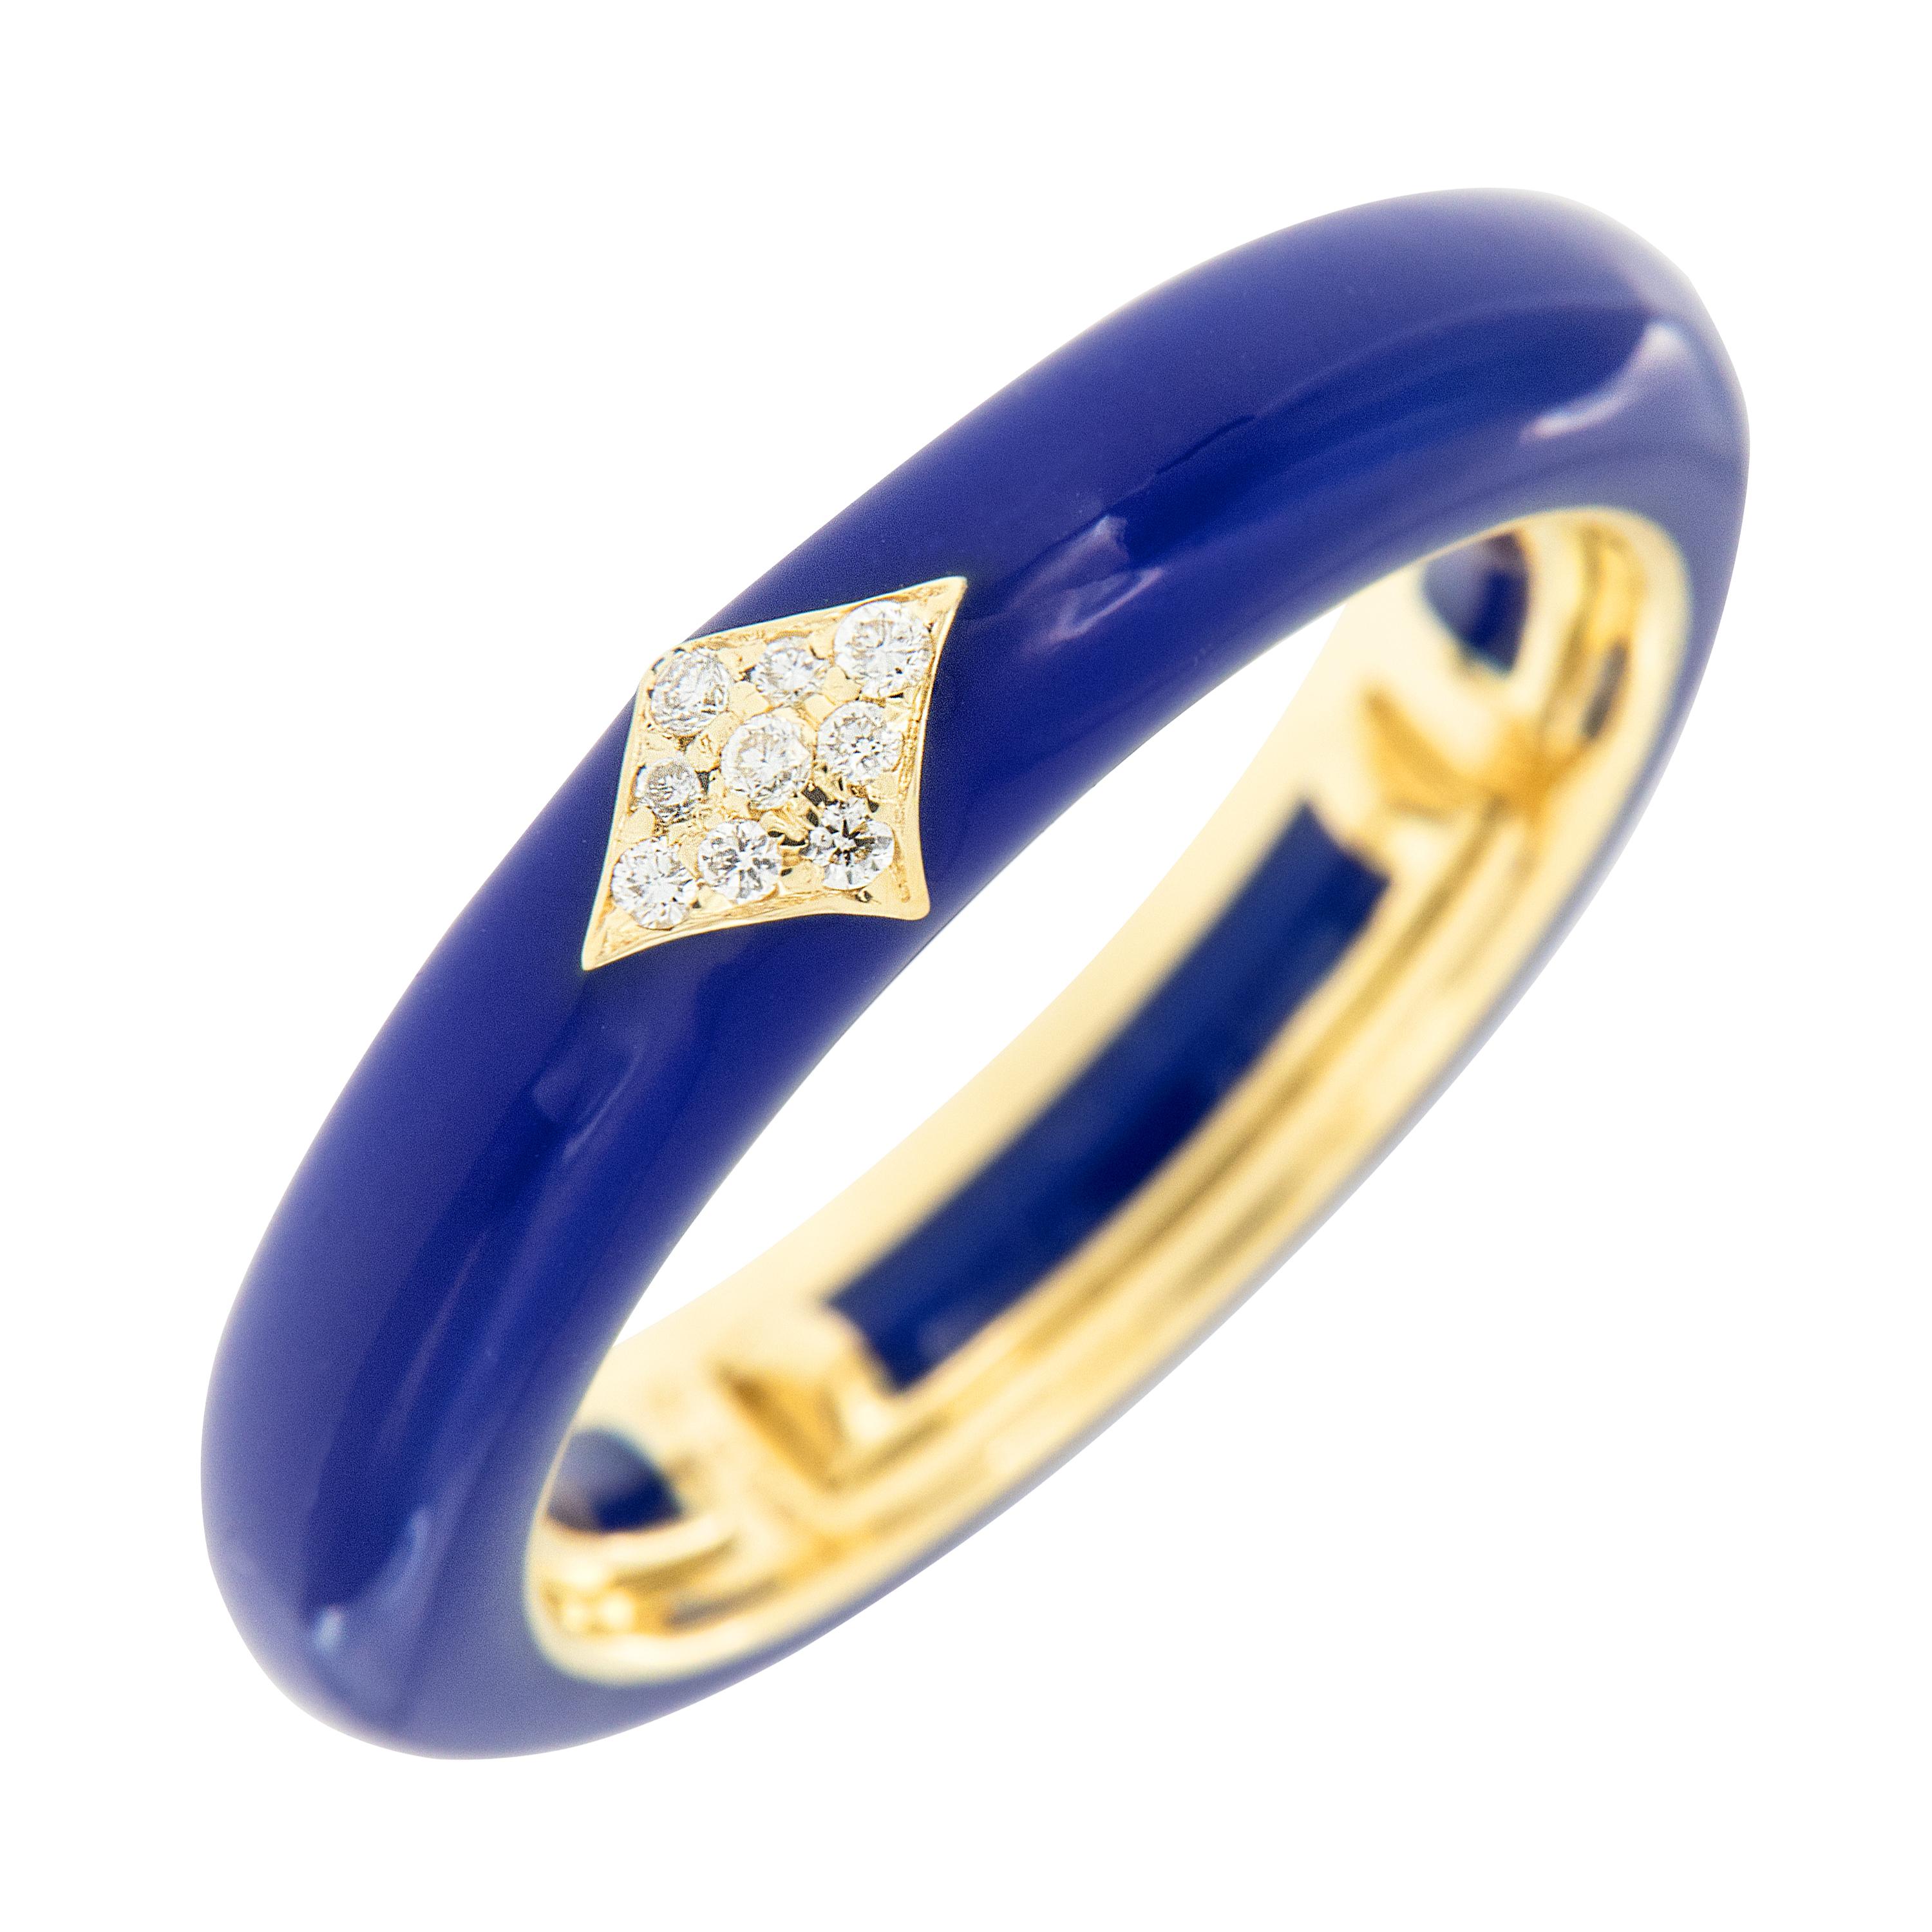 Bold, bright and beautiful! This contemporary enamel ring is hand-crafted in Italy for Campanelli & Pear. Ring is 18k yellow gold featuring a smooth enamel finish in royal blue and accented with 0.07 Cttw pave' set diamonds in chevron. The ring